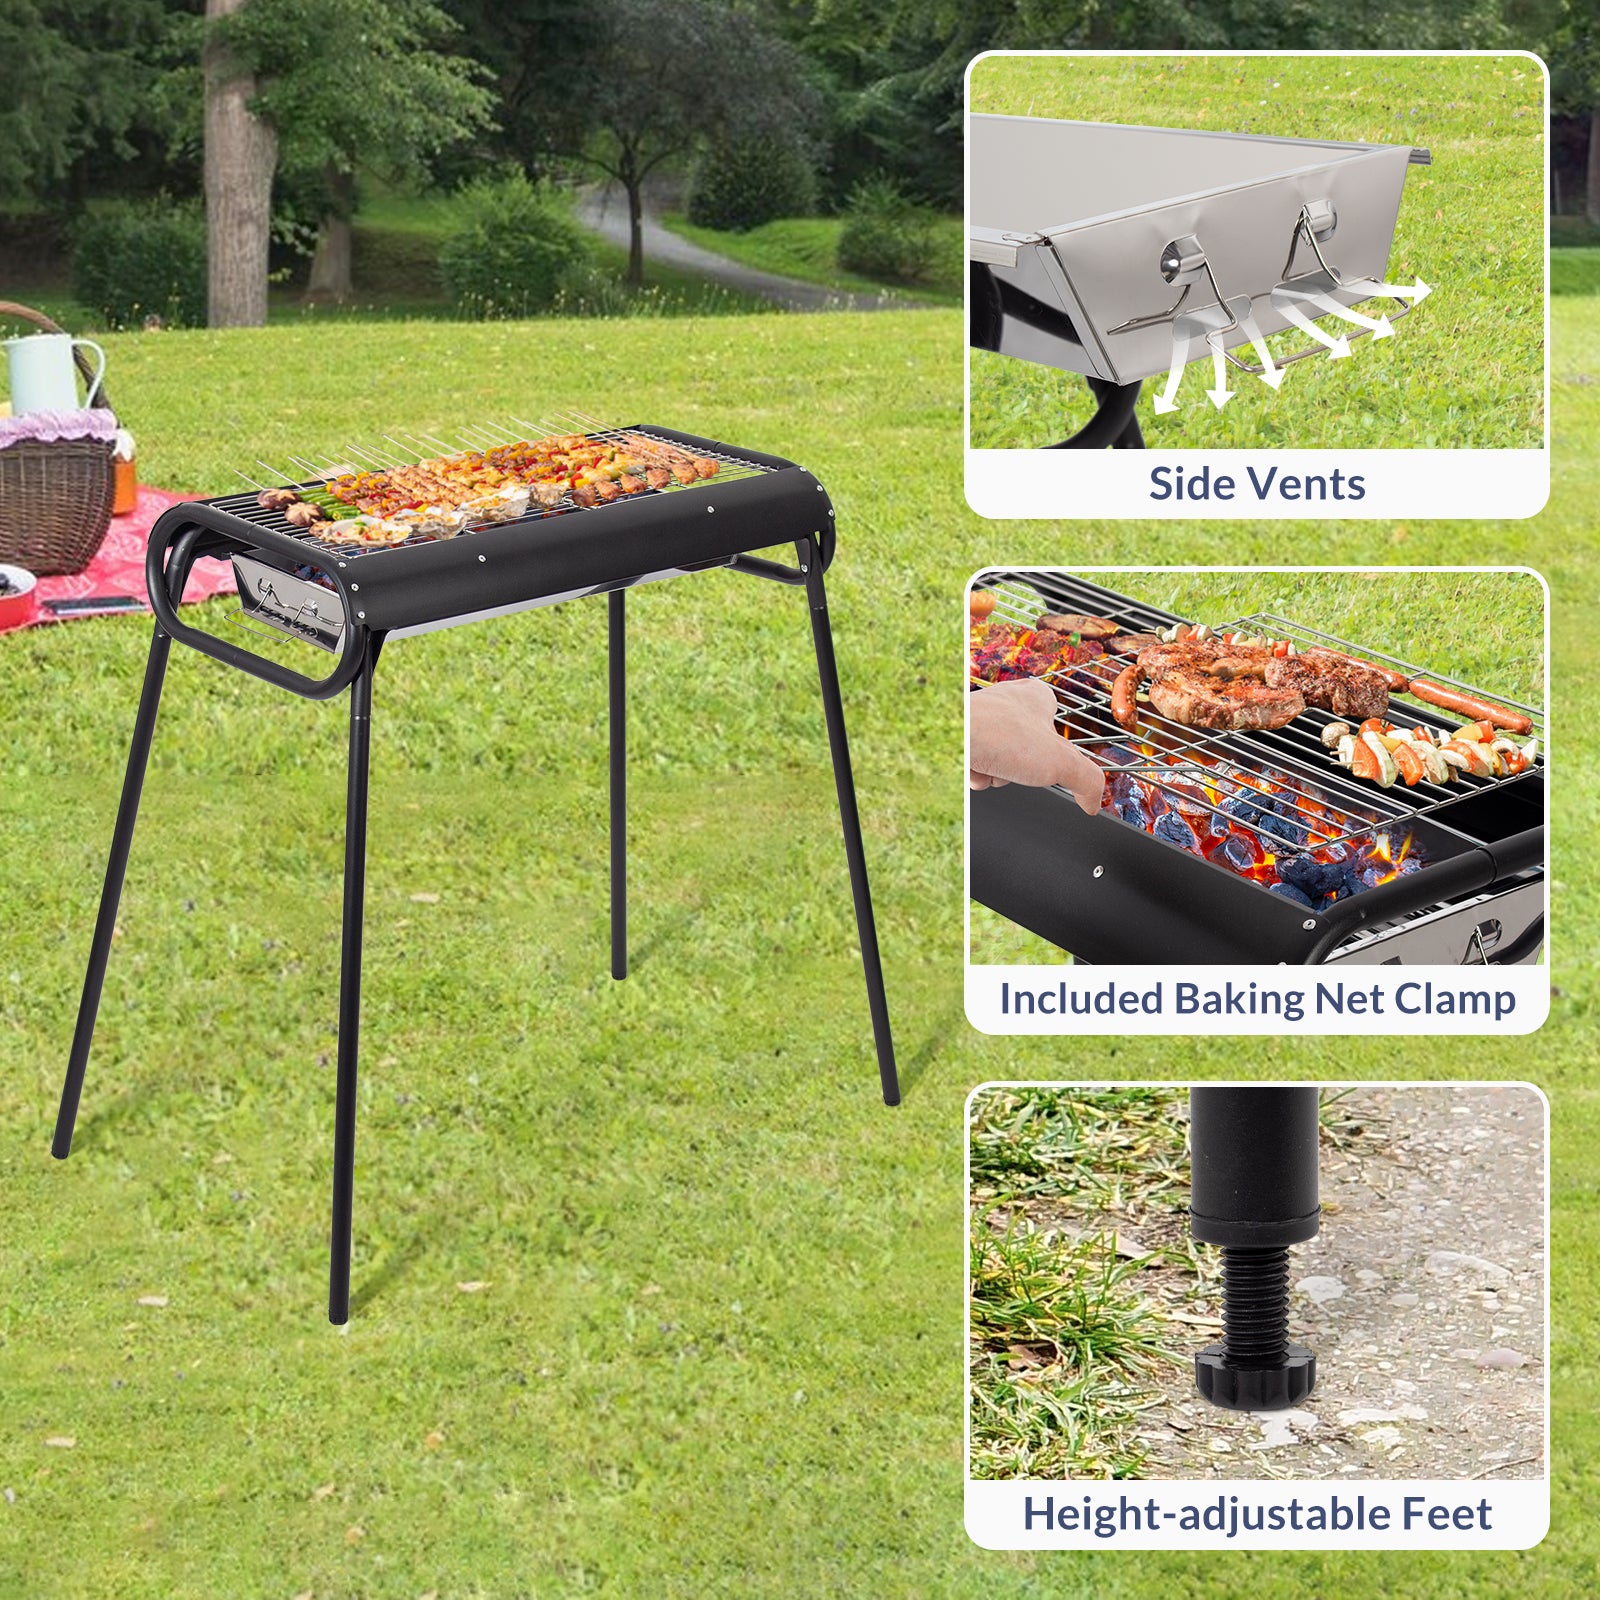 Todeco-Charcoal-Barbecue-with-Grate-Clip-Portable-Dismountable-Steel-Charcoal-Barbecue-with-Carrying-Bag-for-BBQ-Picnic-Garden-Camping